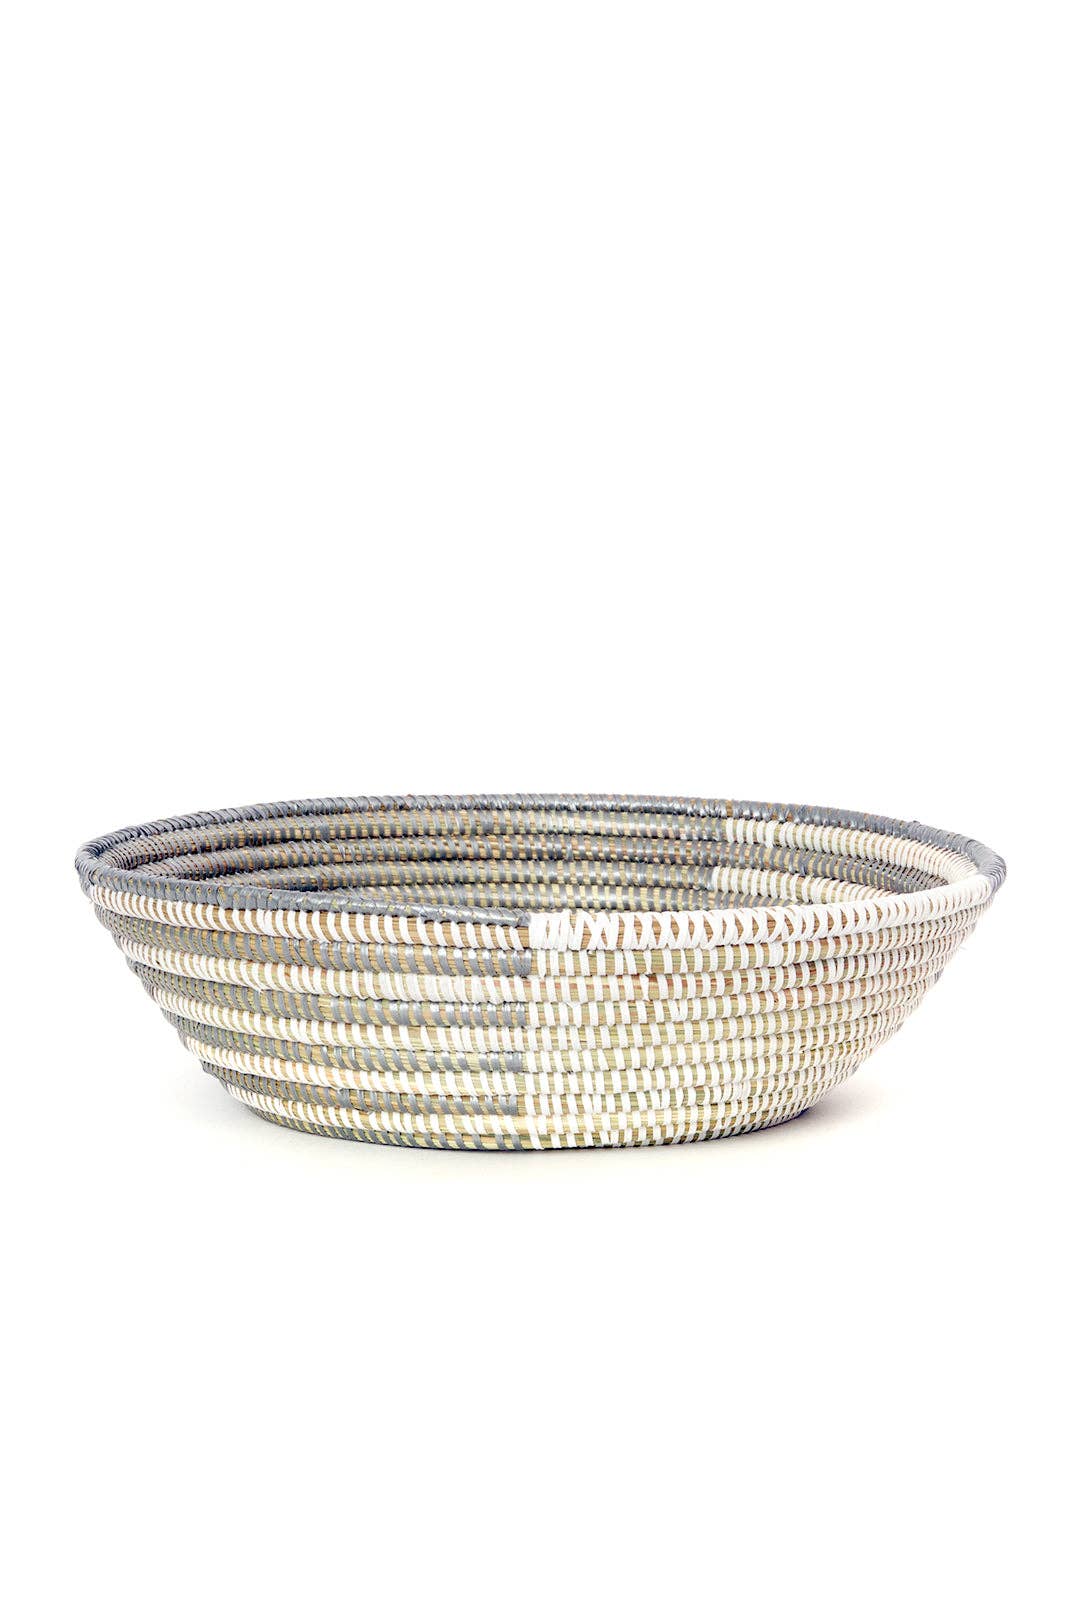 Swahili | AFRICAN MODERN - Silver and White Delta Tabletop Baskets